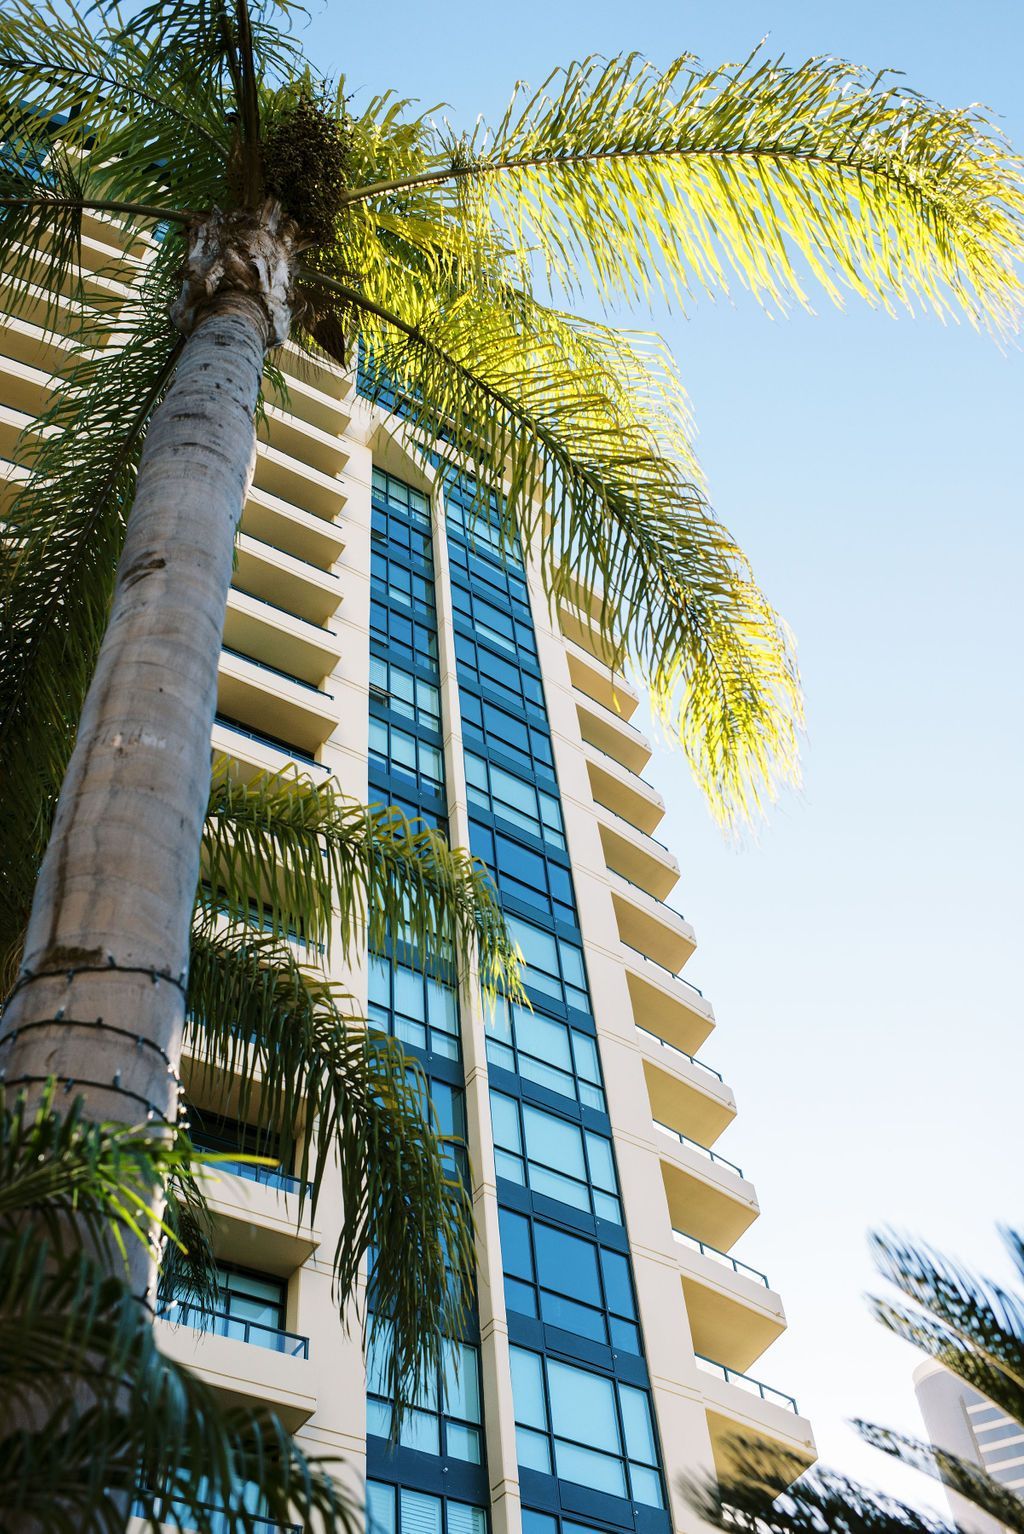 looking up at a tall building with palm trees in front of it